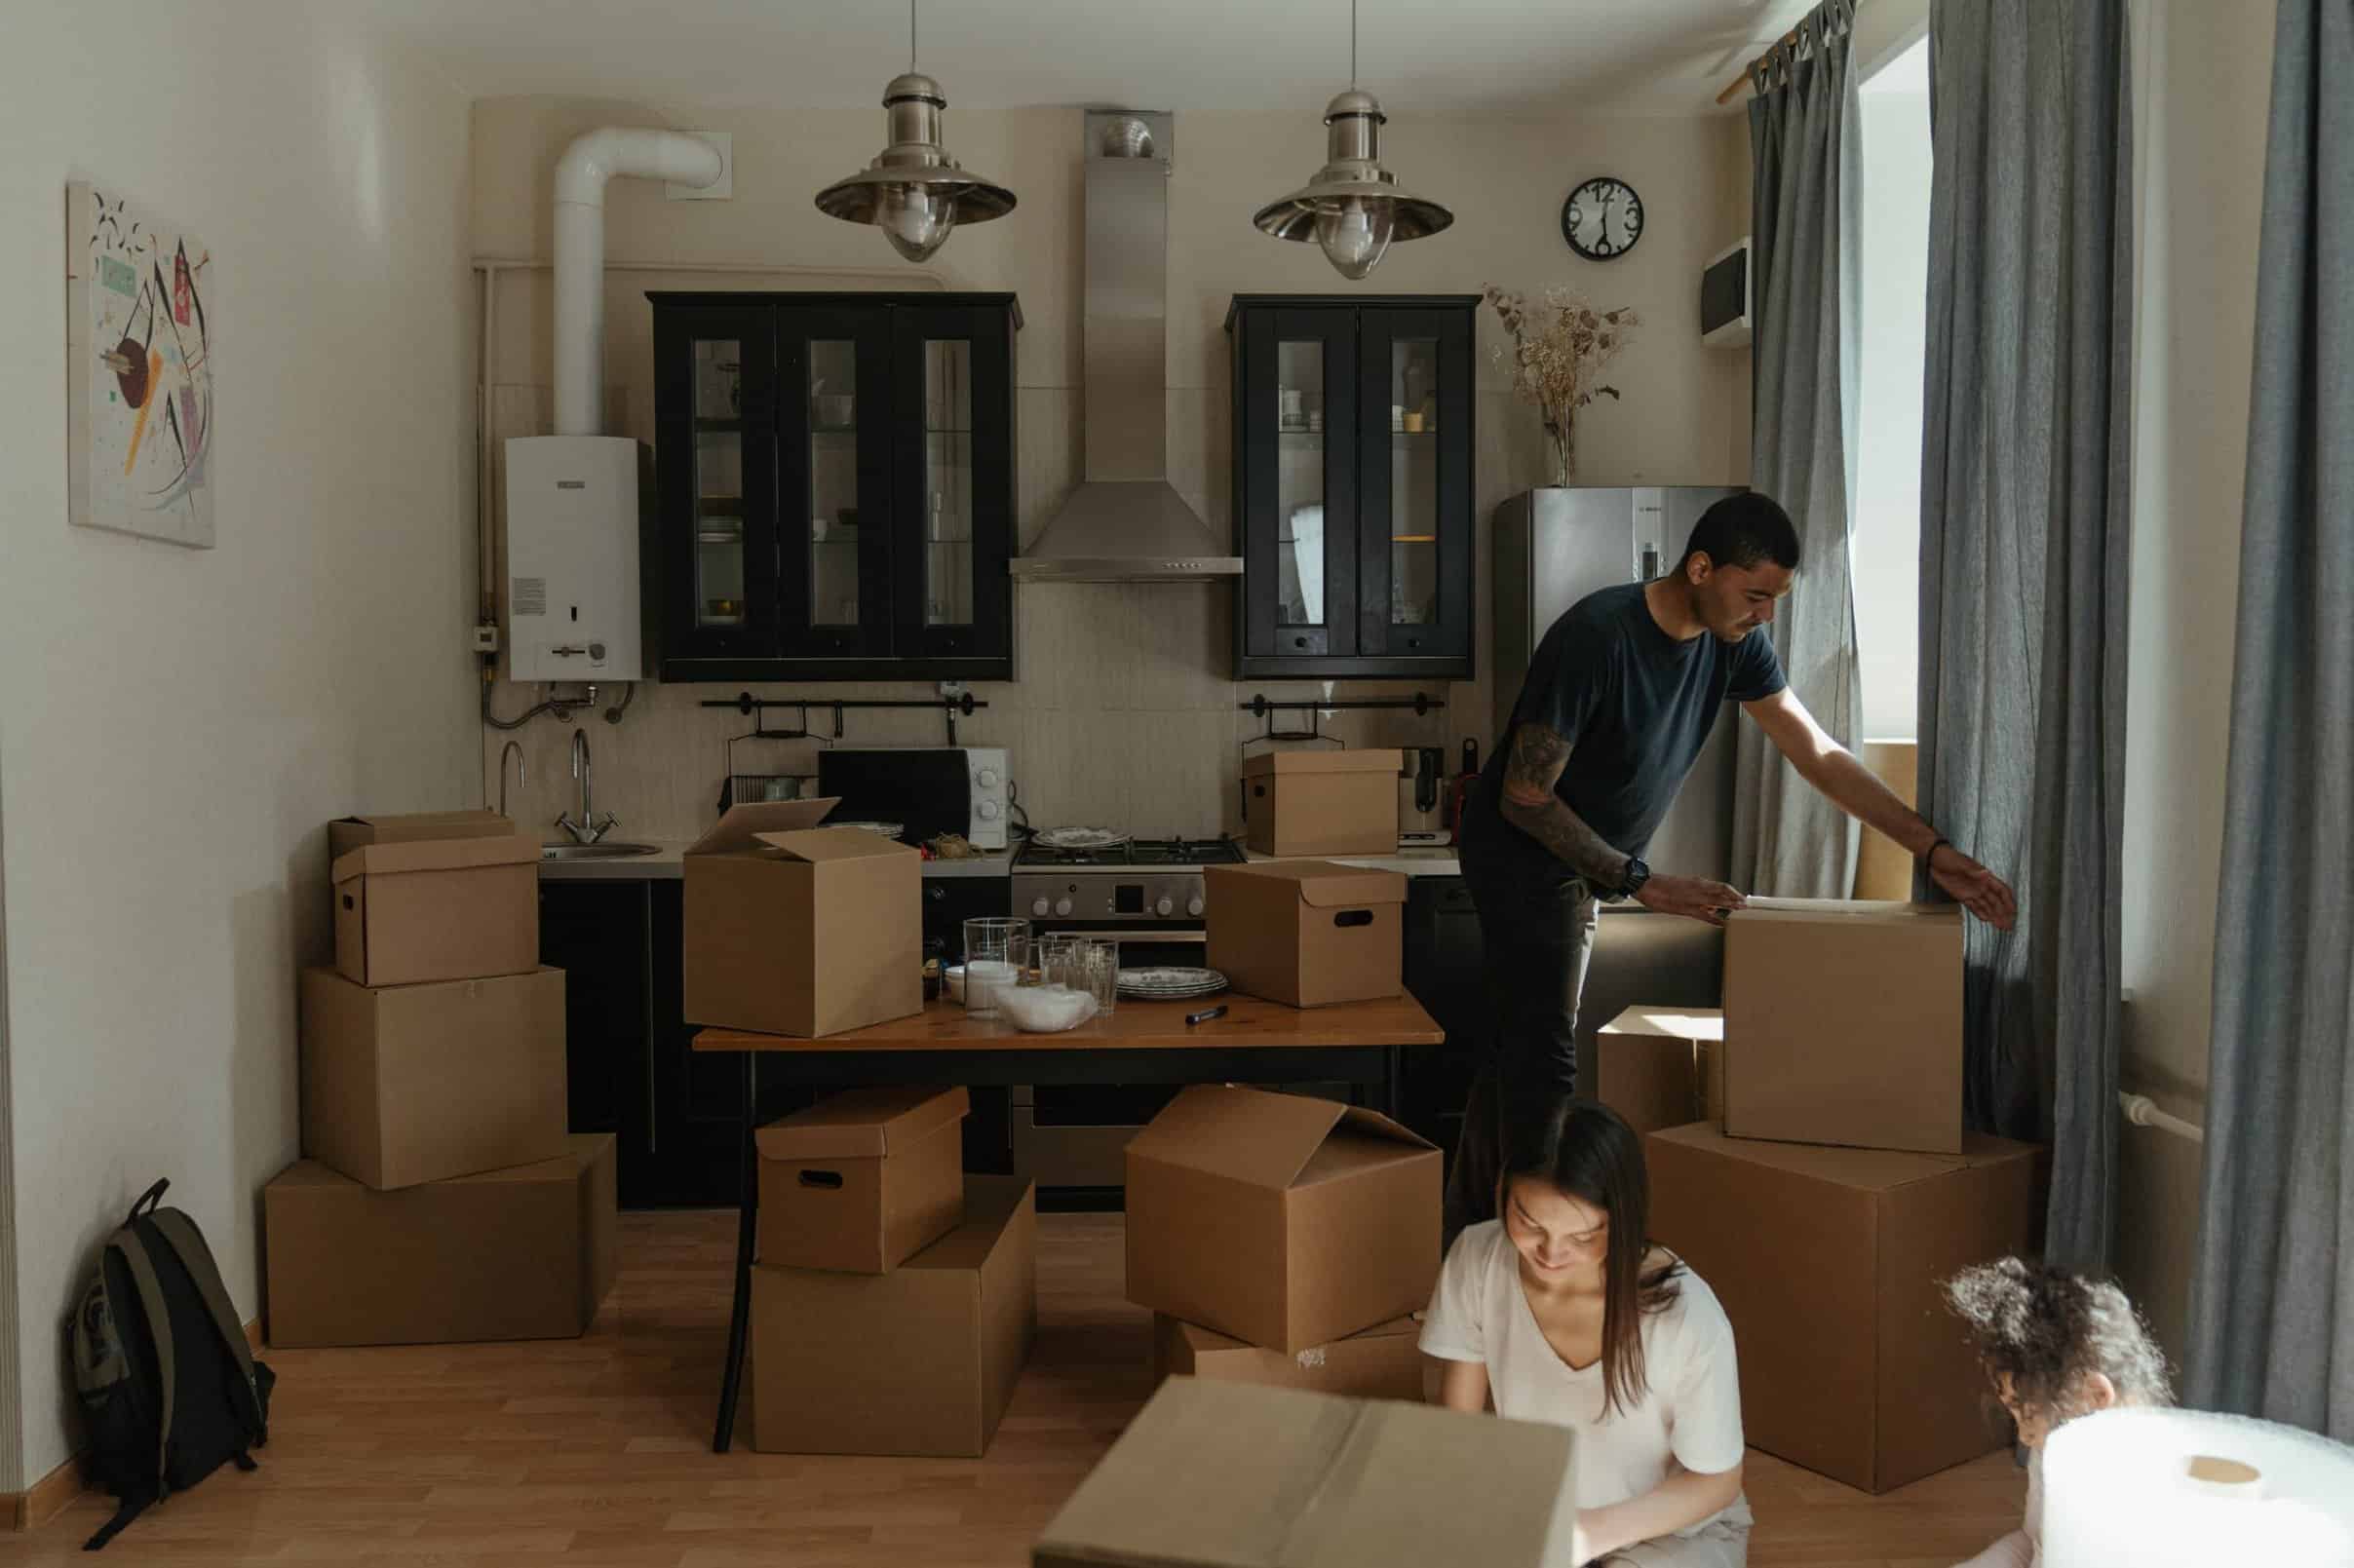 house removals London